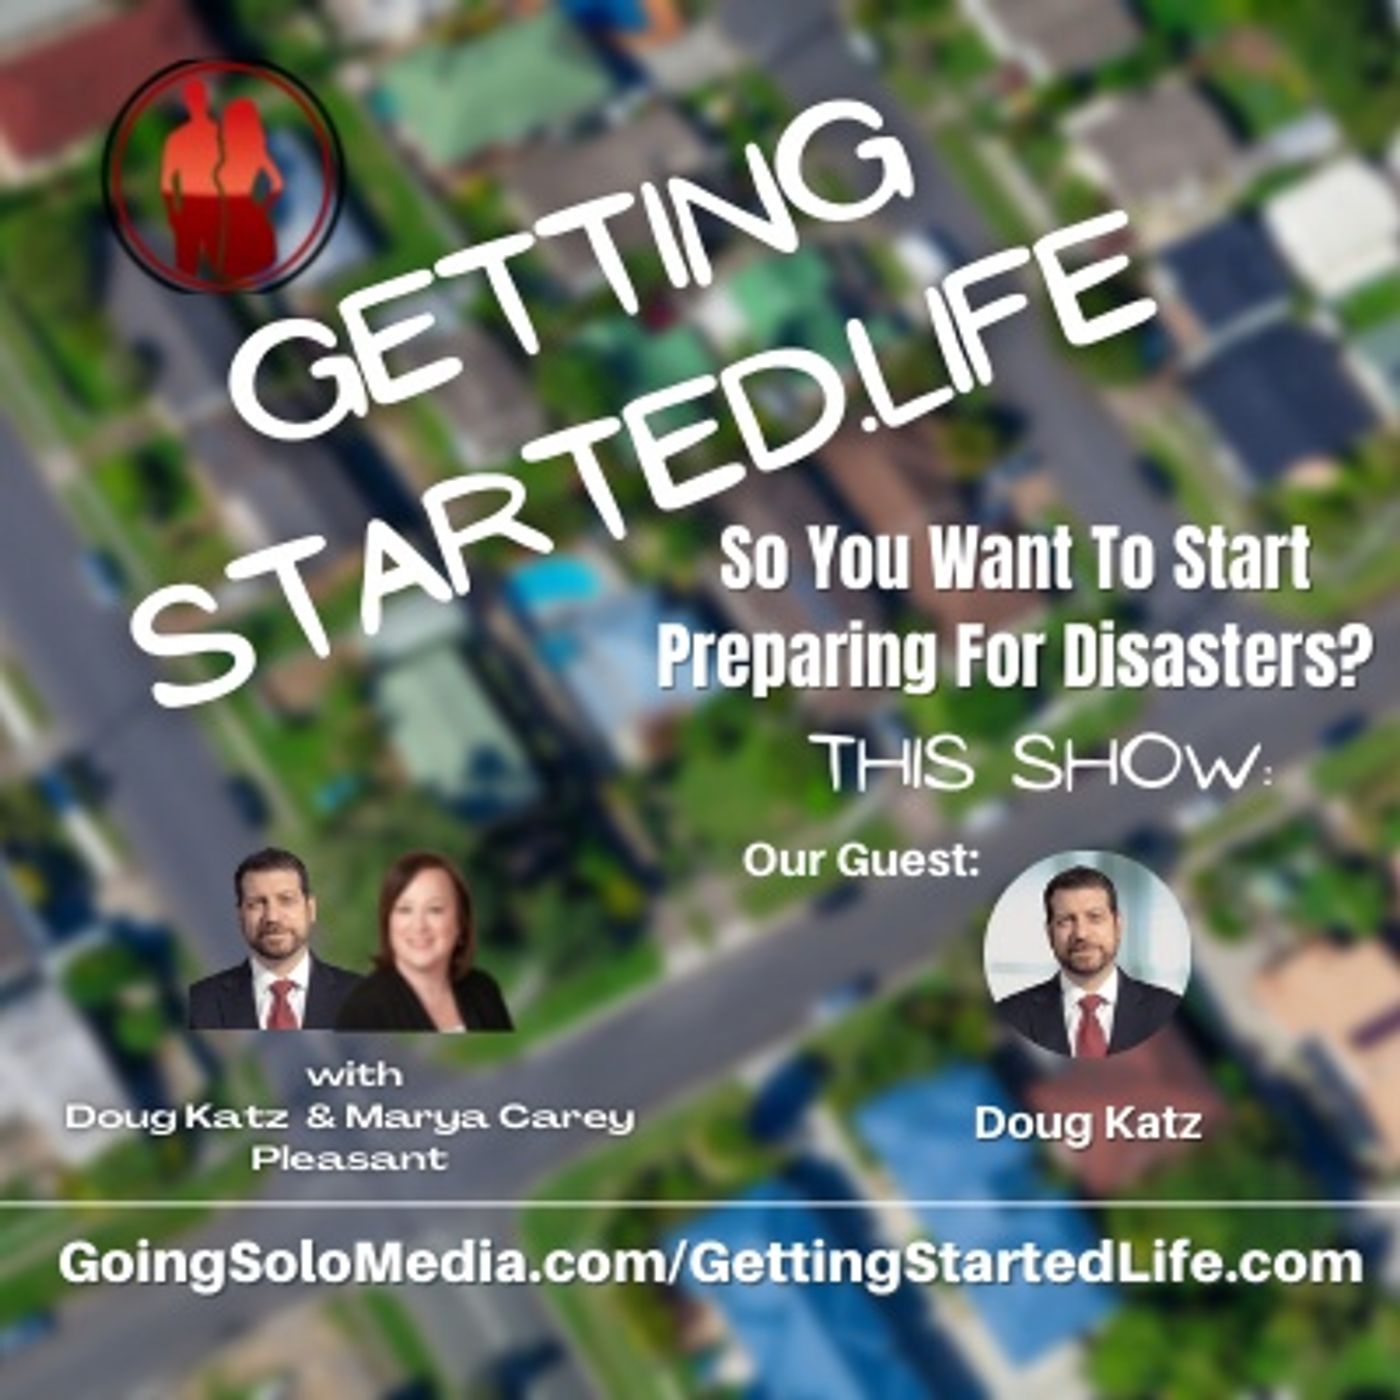 So You Want To Start Preparing For Disasters